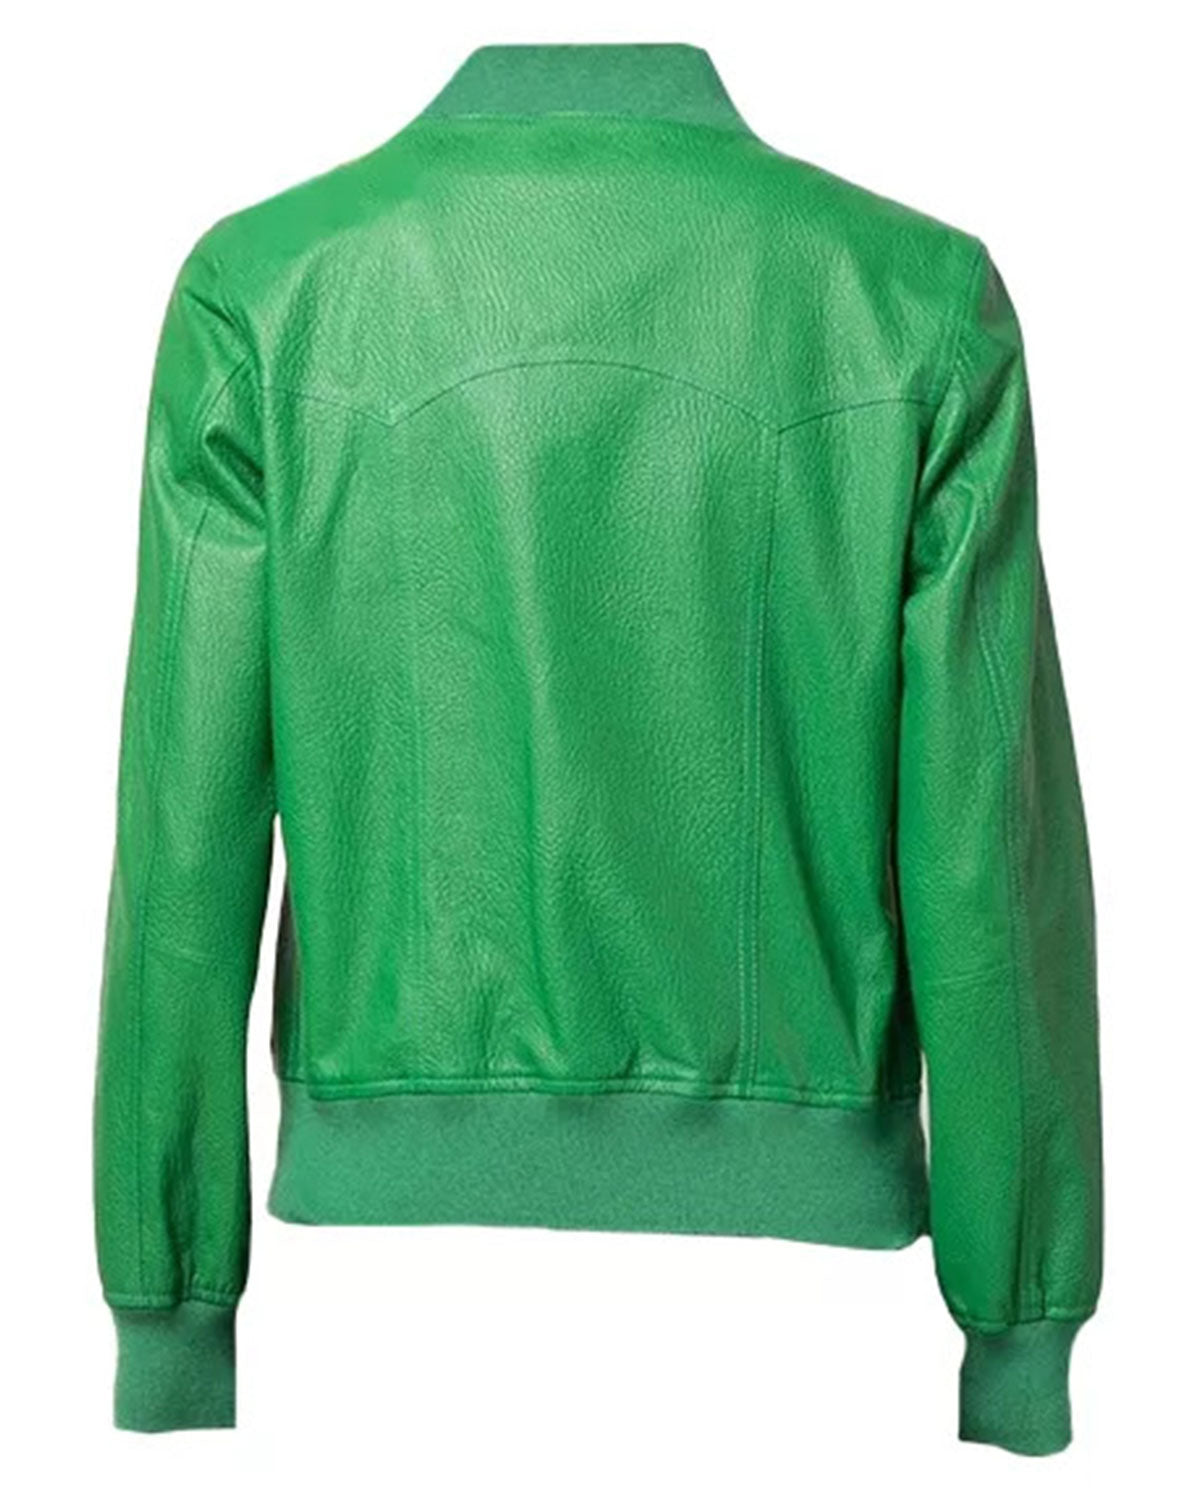 Womens Green Buttoned Leather Jacket | Elite Jacket